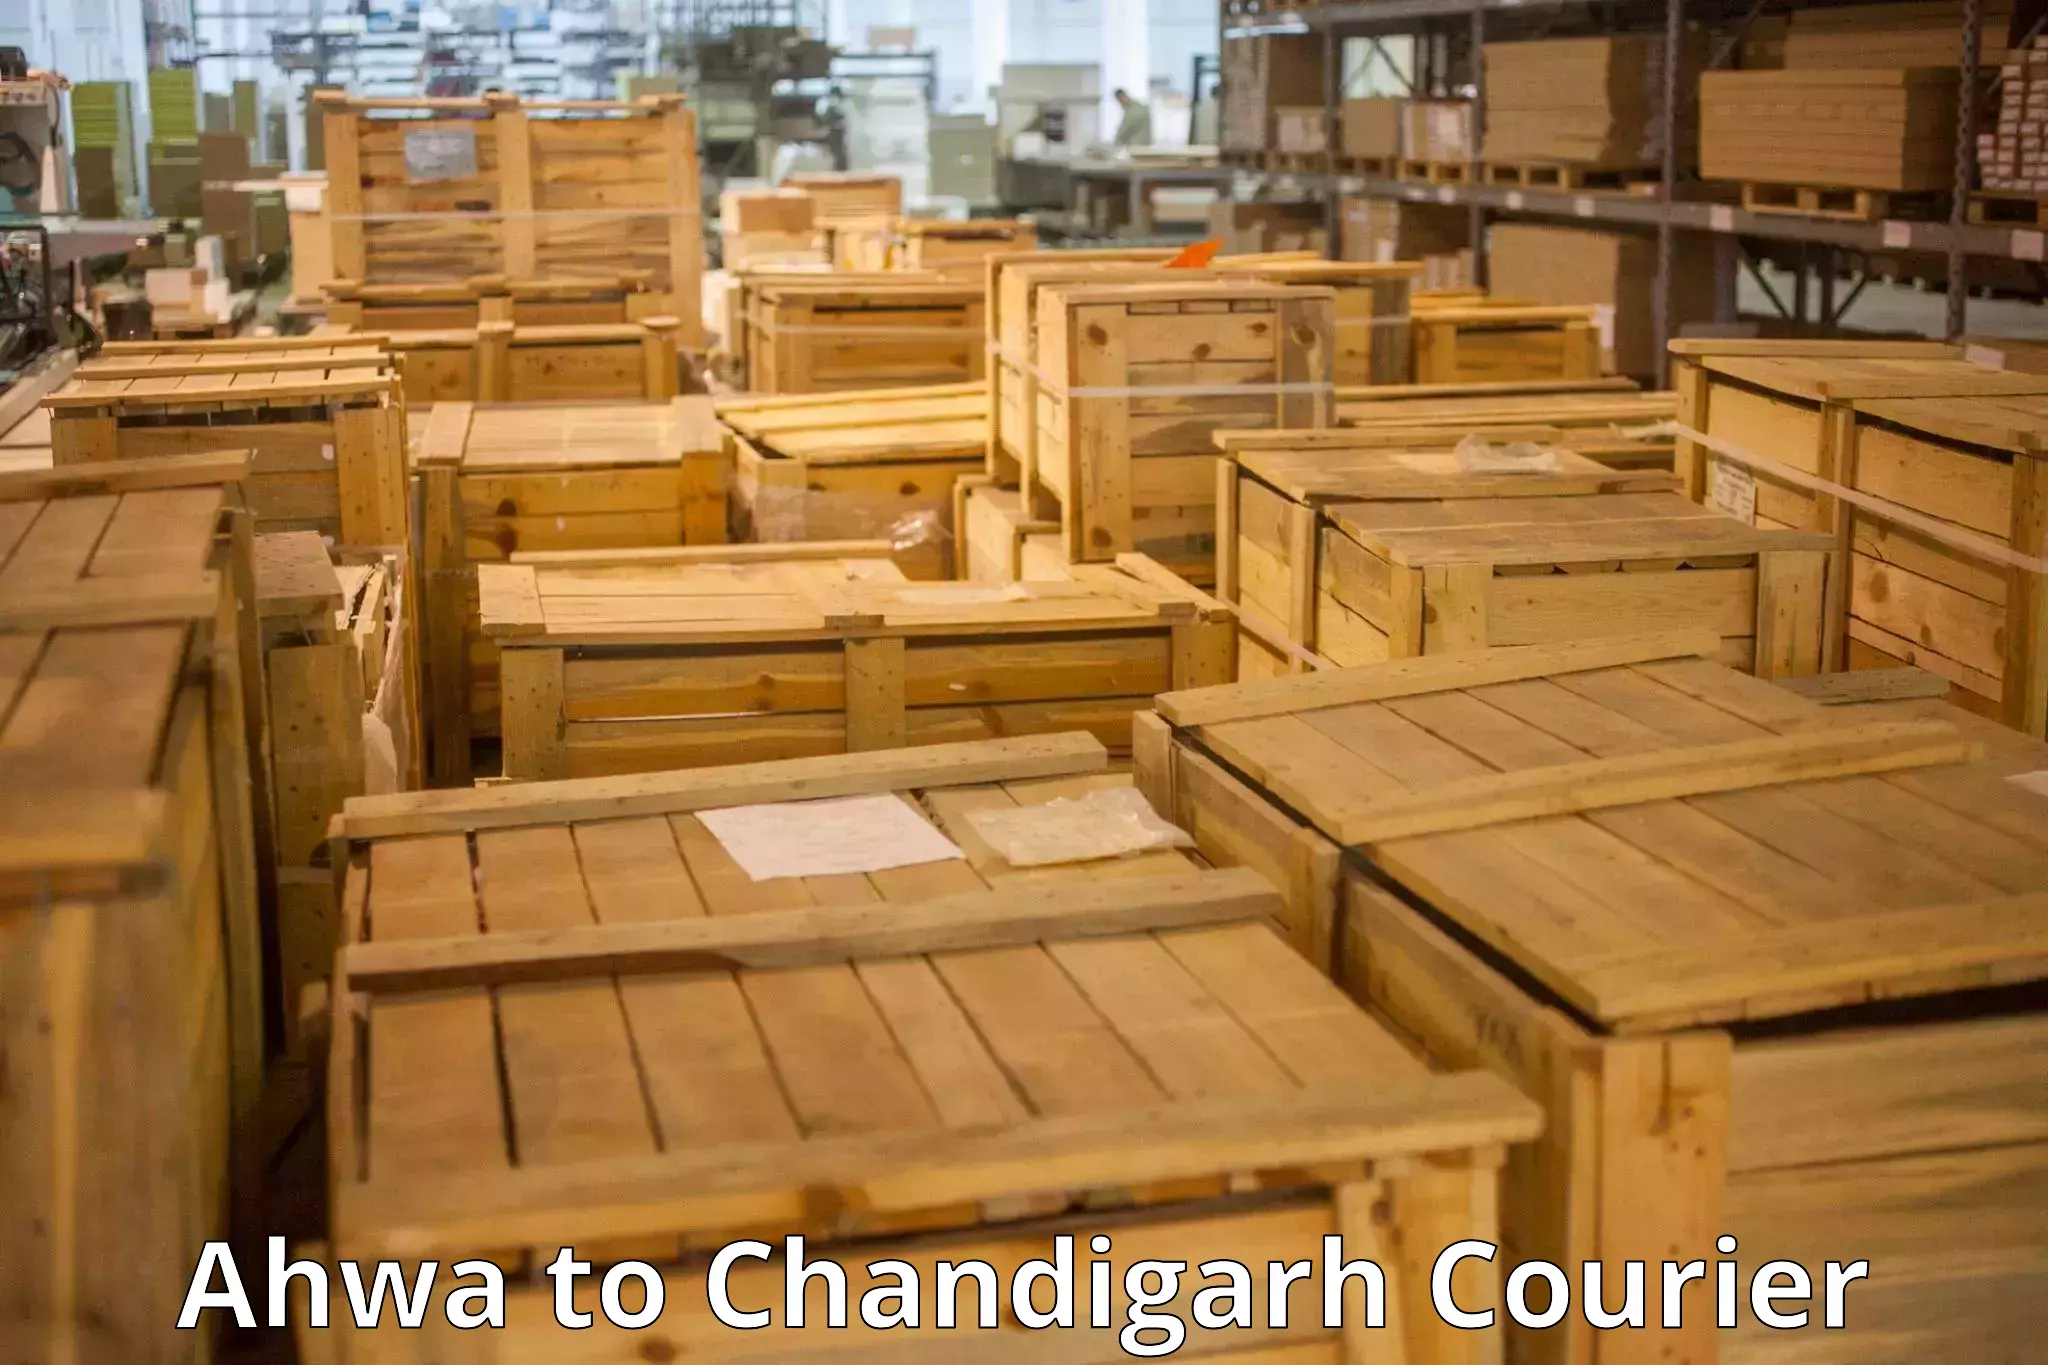 Luggage transport company Ahwa to Chandigarh